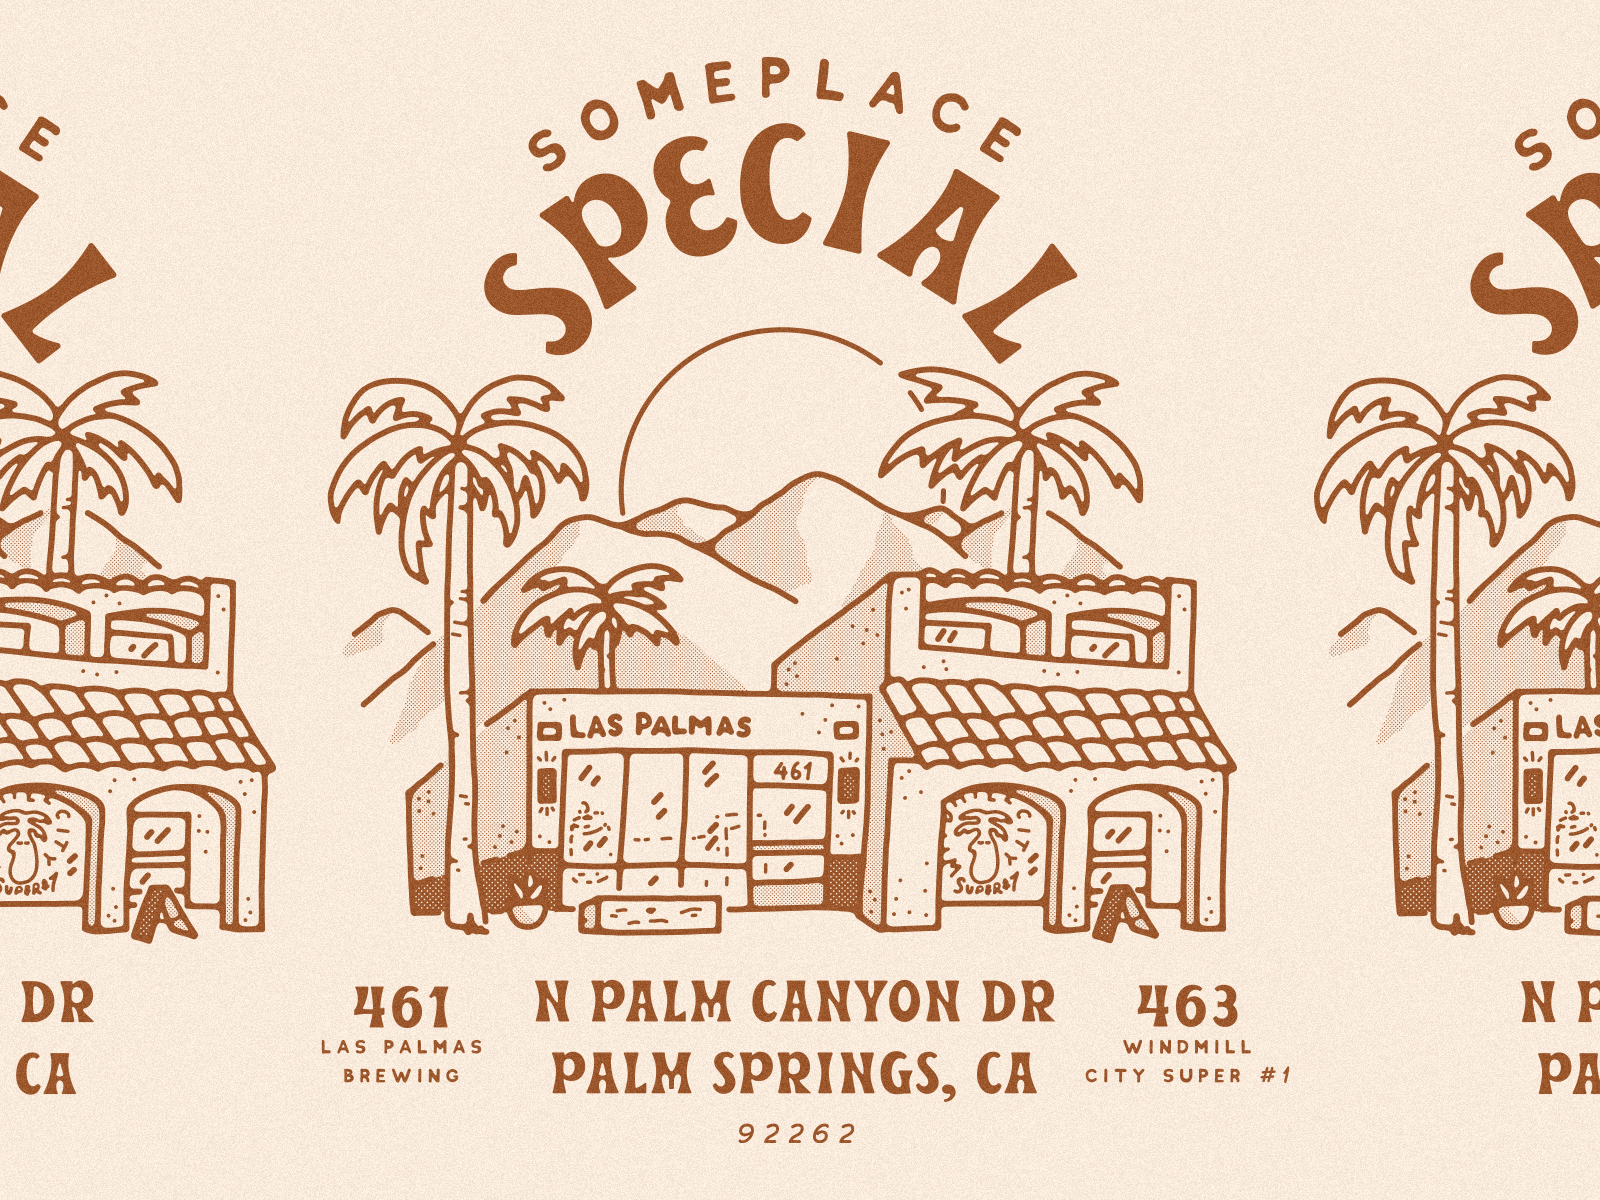 Windmill City Super #1 x Las Palmas beer beer art brewery building illustration gift shop illustration local palm springs palm tree shop local small business someplace special storefront